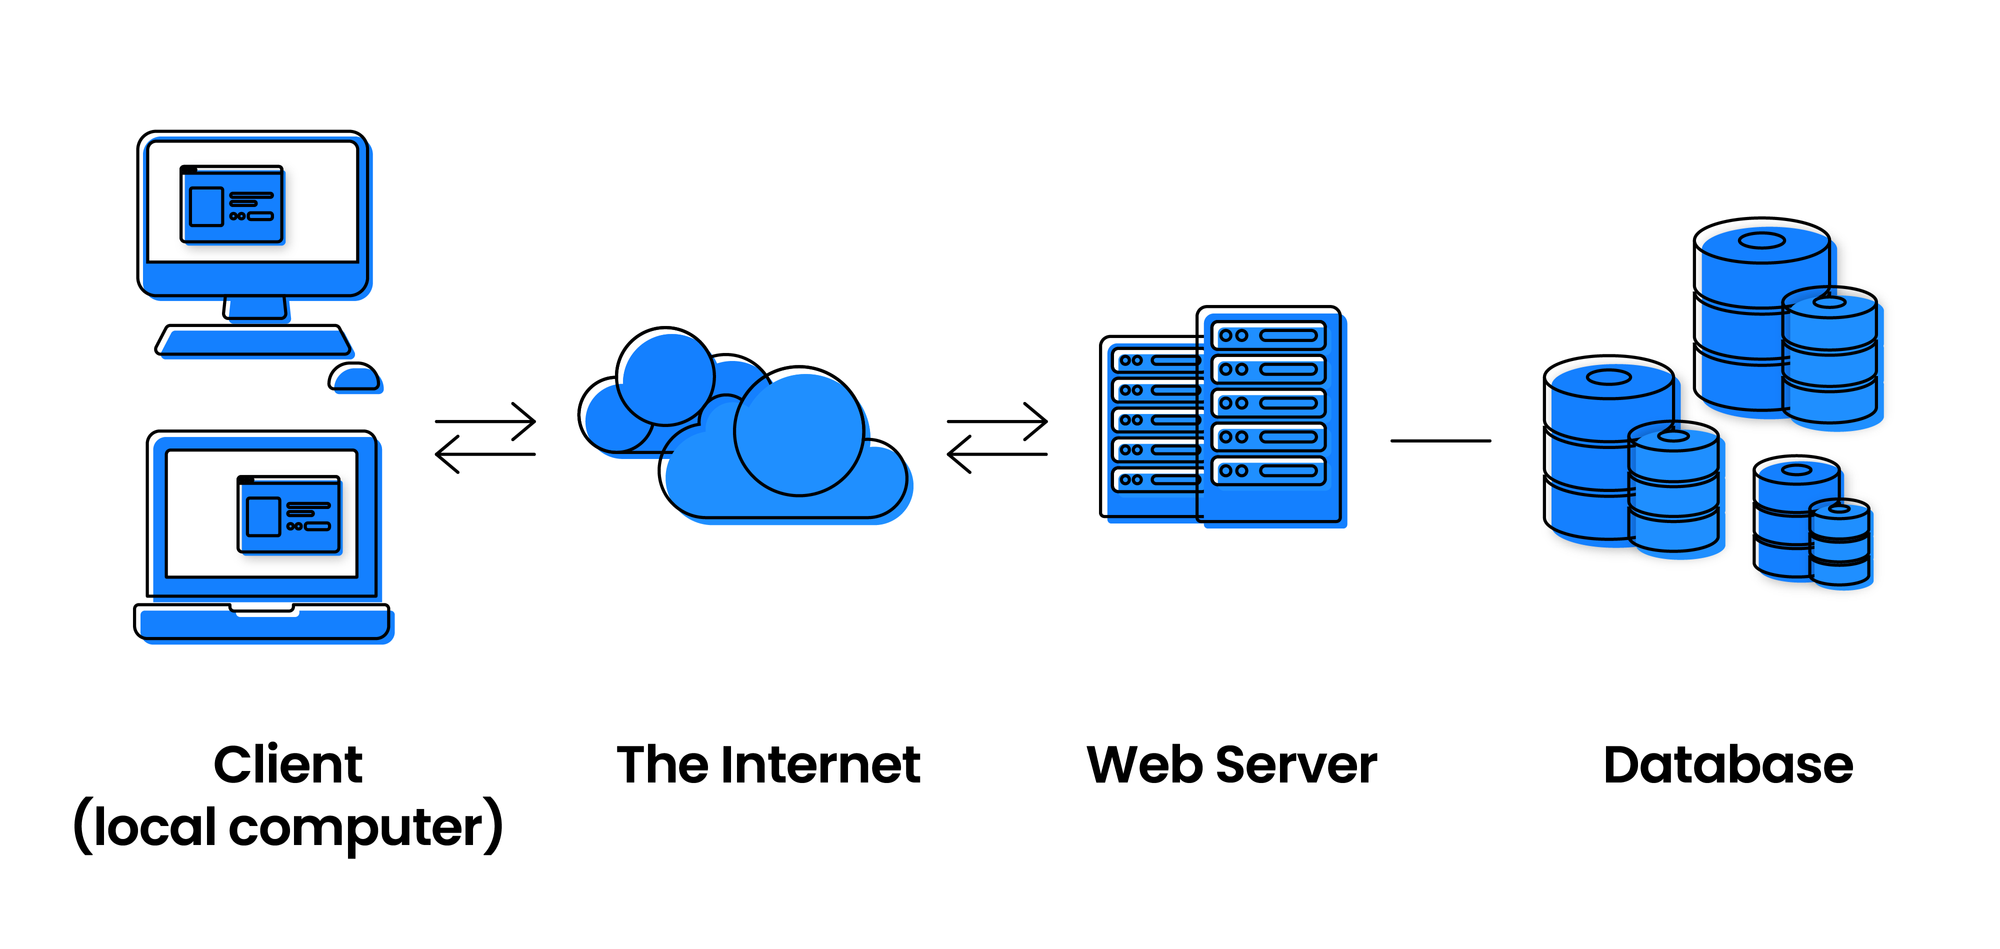 The data transfer between local devices and a web server